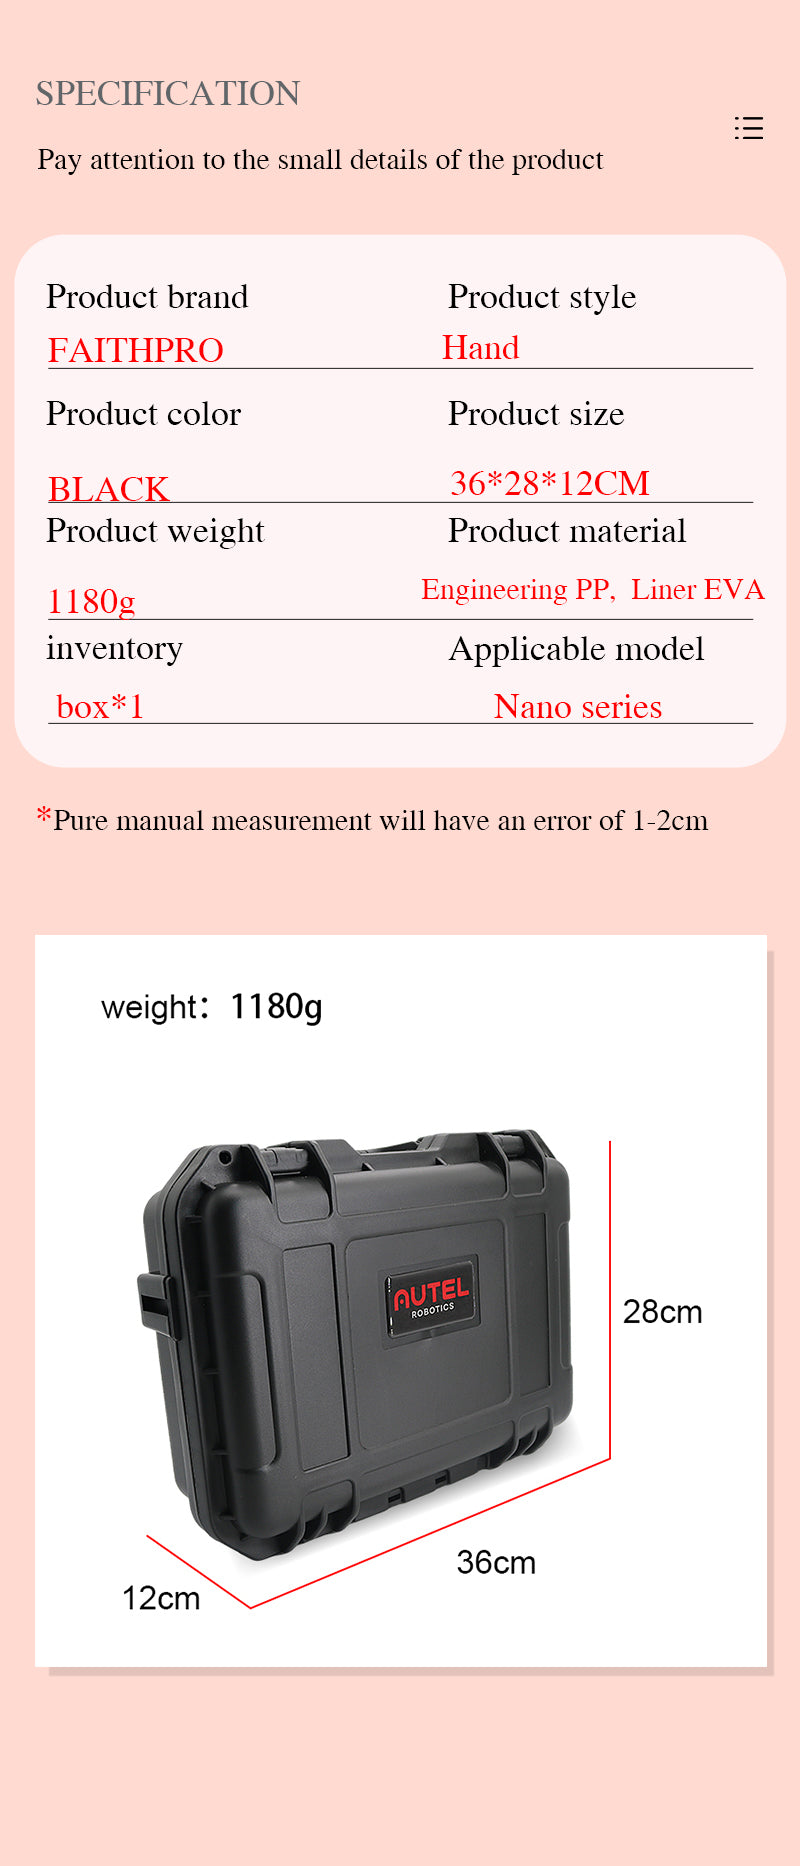 autel box specification and size